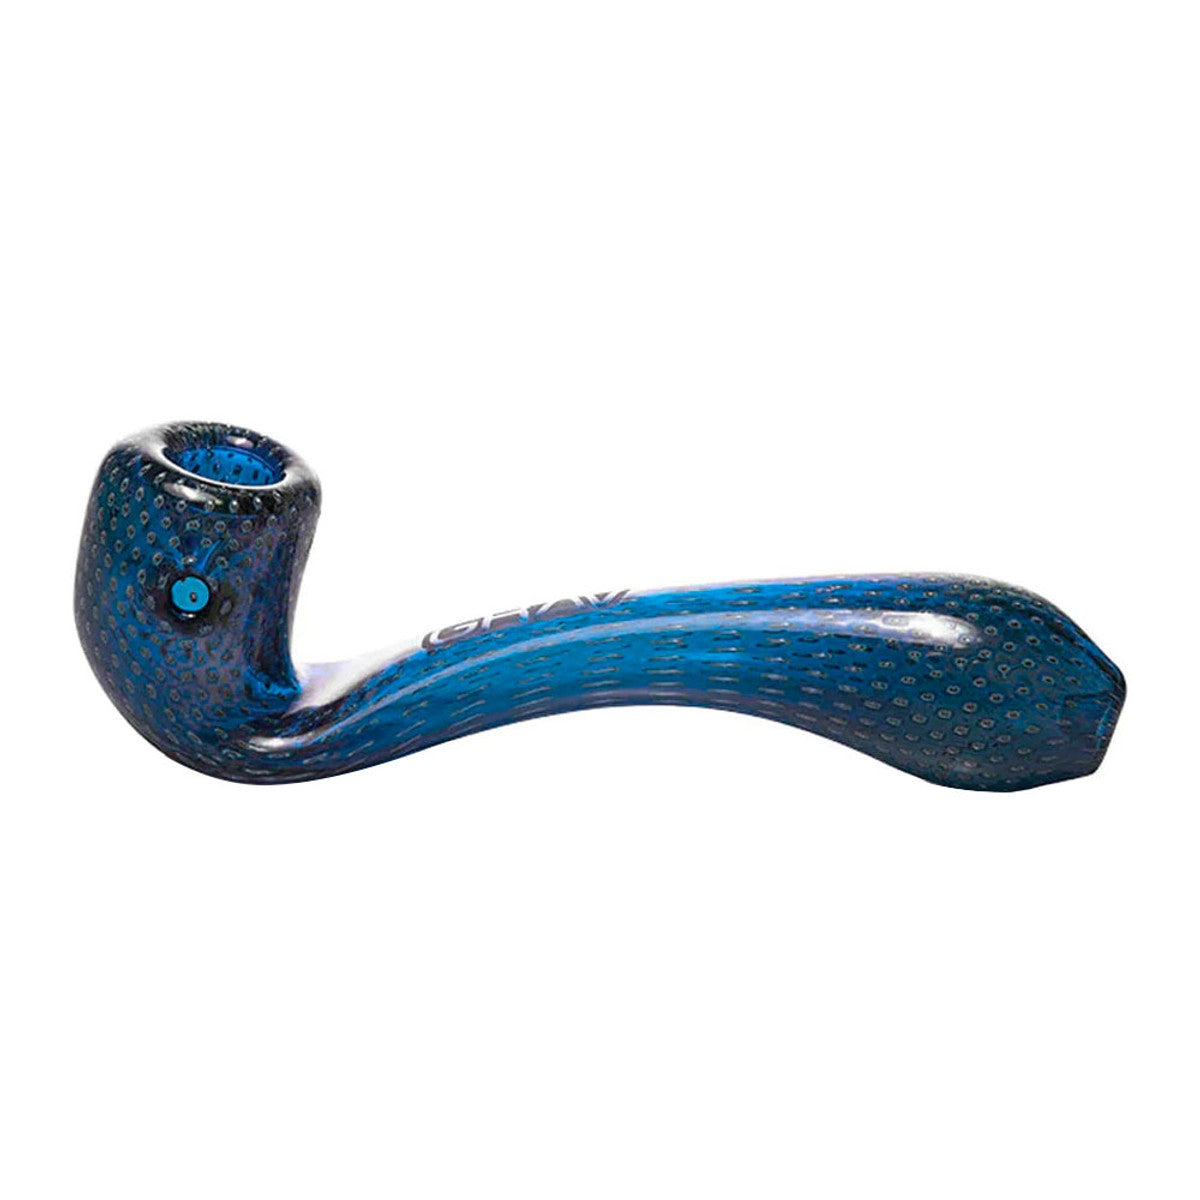 The Grav Classic Sherlock gets a tasty upgrade with a new dappled design. Tiny air bubbles are distributed throughout layers of glass, creating a mosaic of dots and dashes that make each piece unique. 